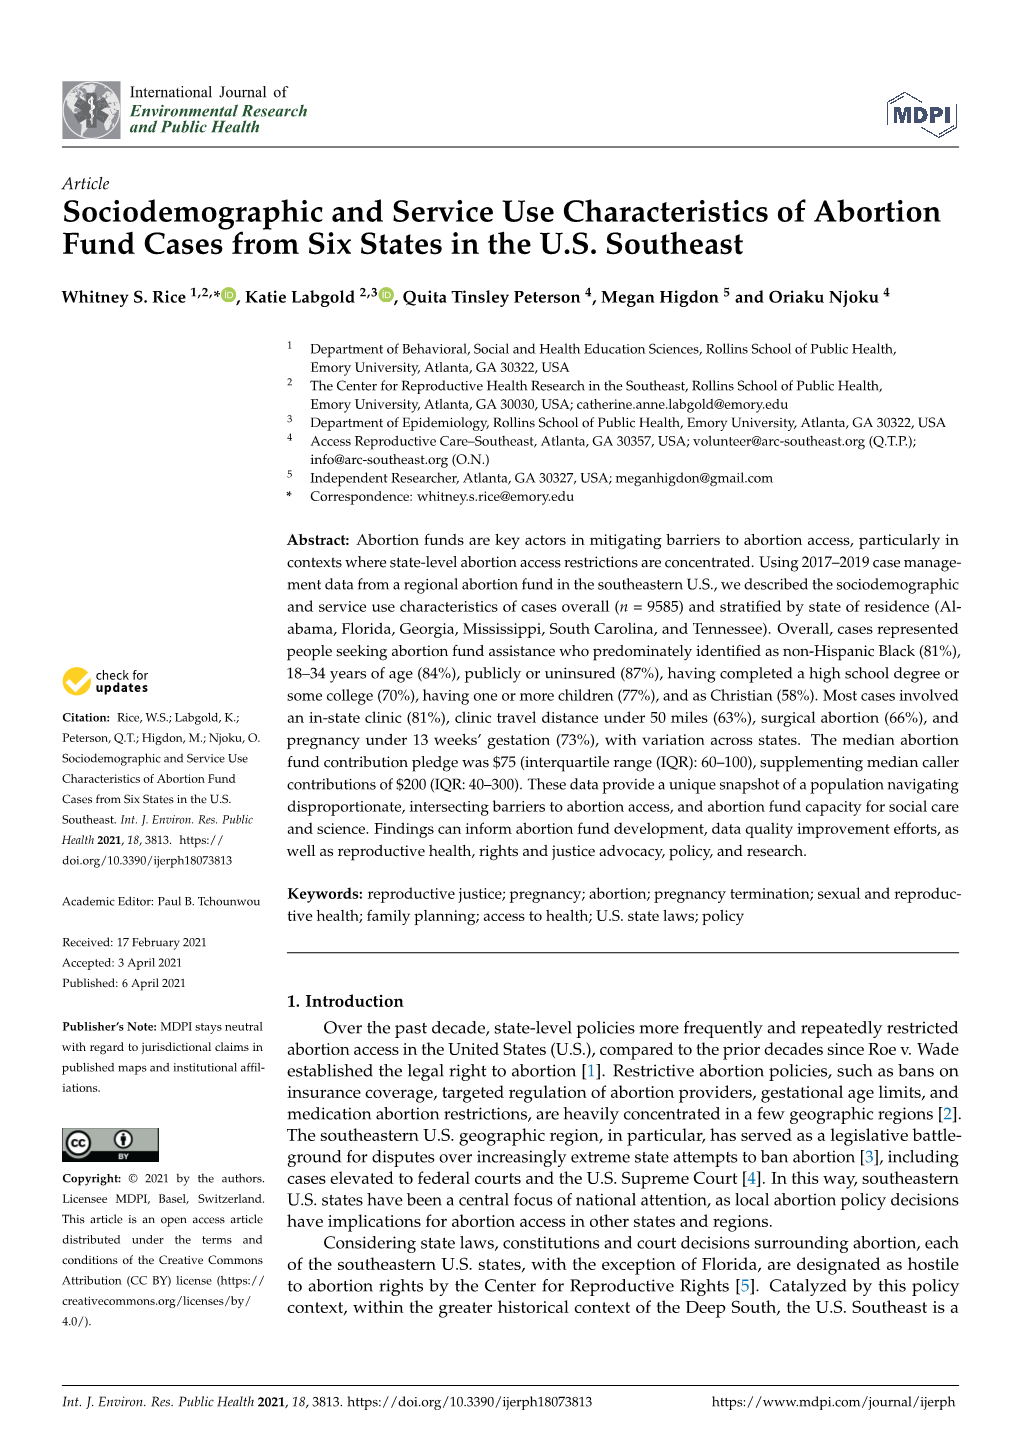 Sociodemographic and Service Use Characteristics of Abortion Fund Cases from Six States in the U.S